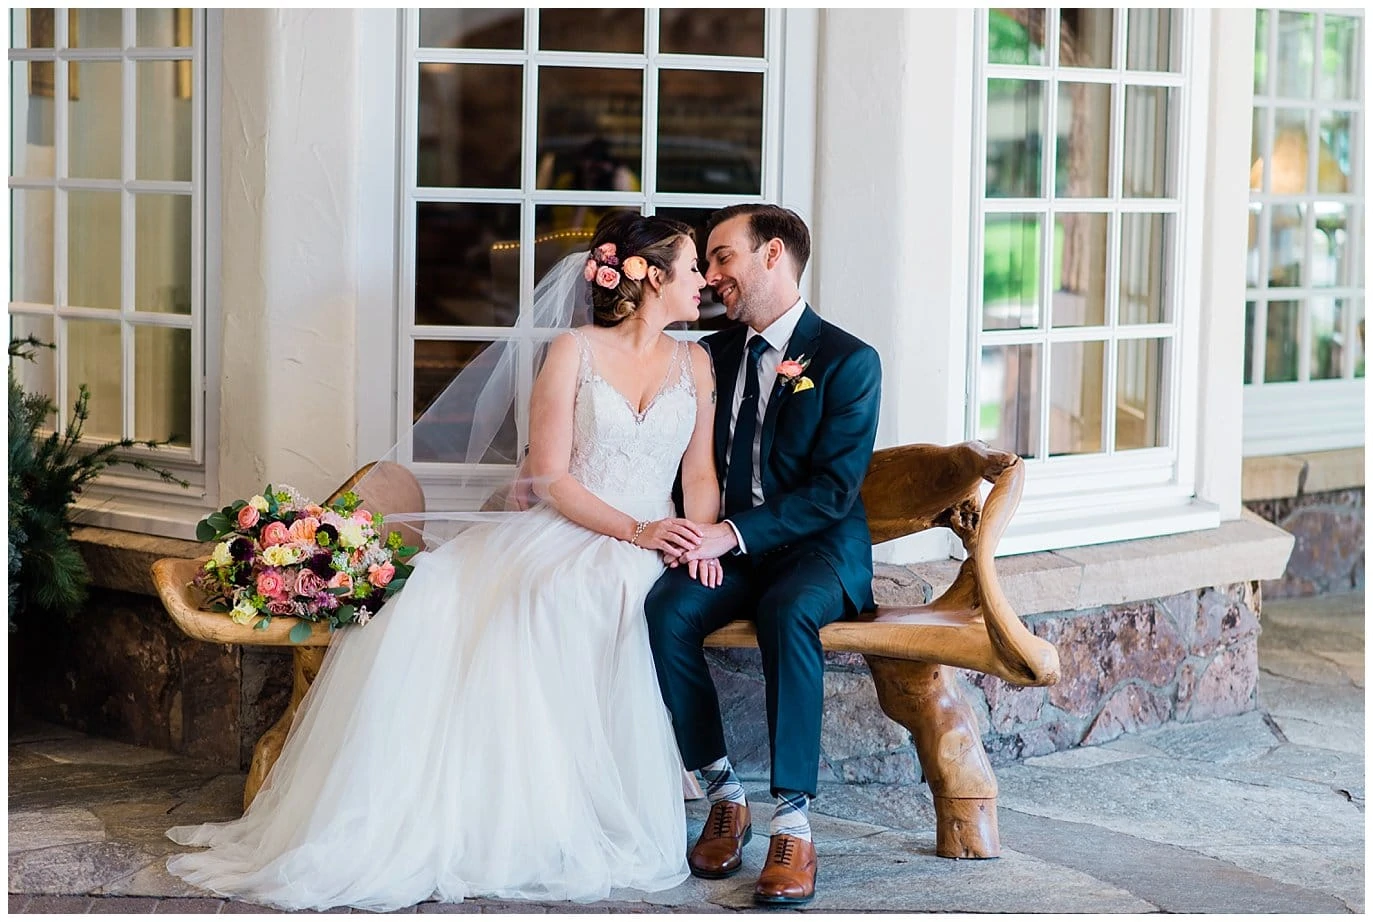 Bride and groom on bench at Sonnenalp Hotel Vail Colorado Wedding by Aspen Wedding Photographer Jennie Crate